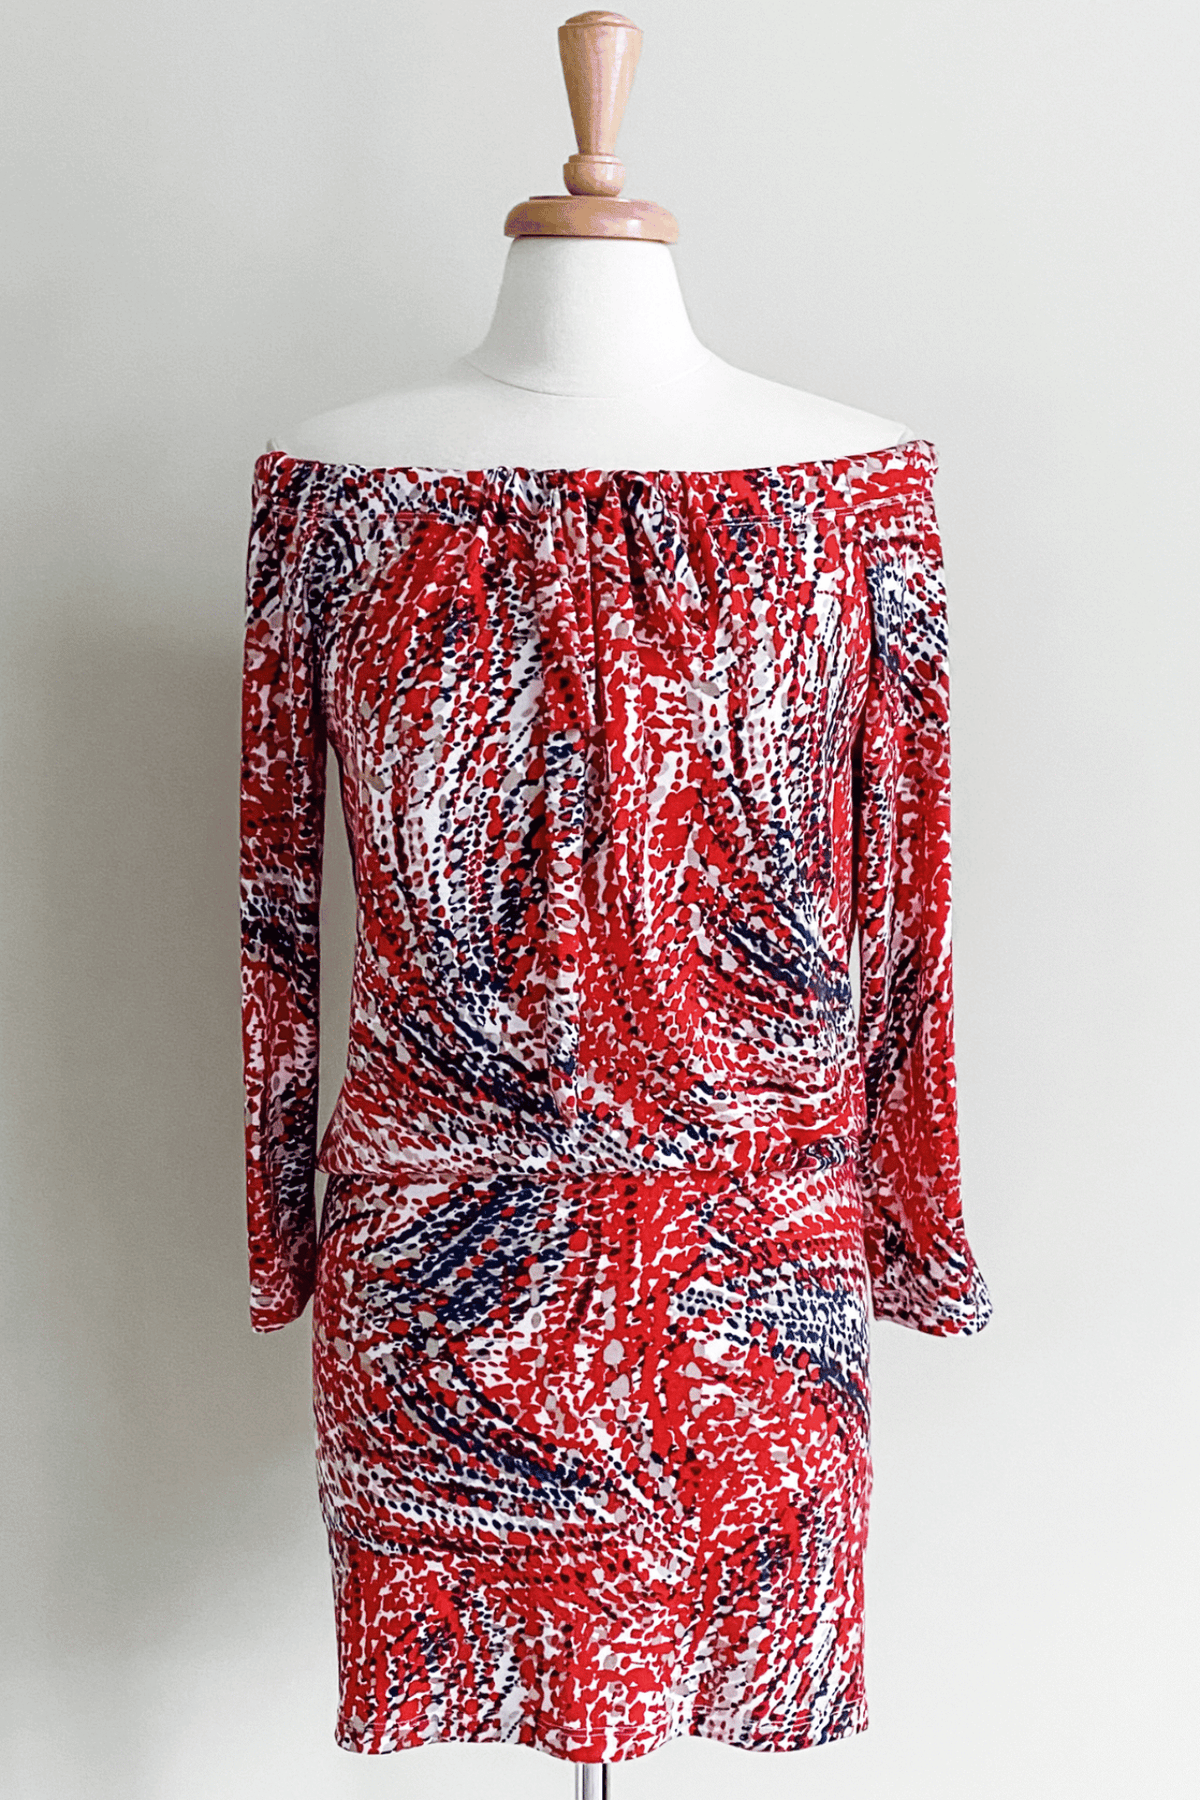 Diane Kroe Evermore Dress (Whirlpool Red Navy) - Warm Weather Capsule Collection